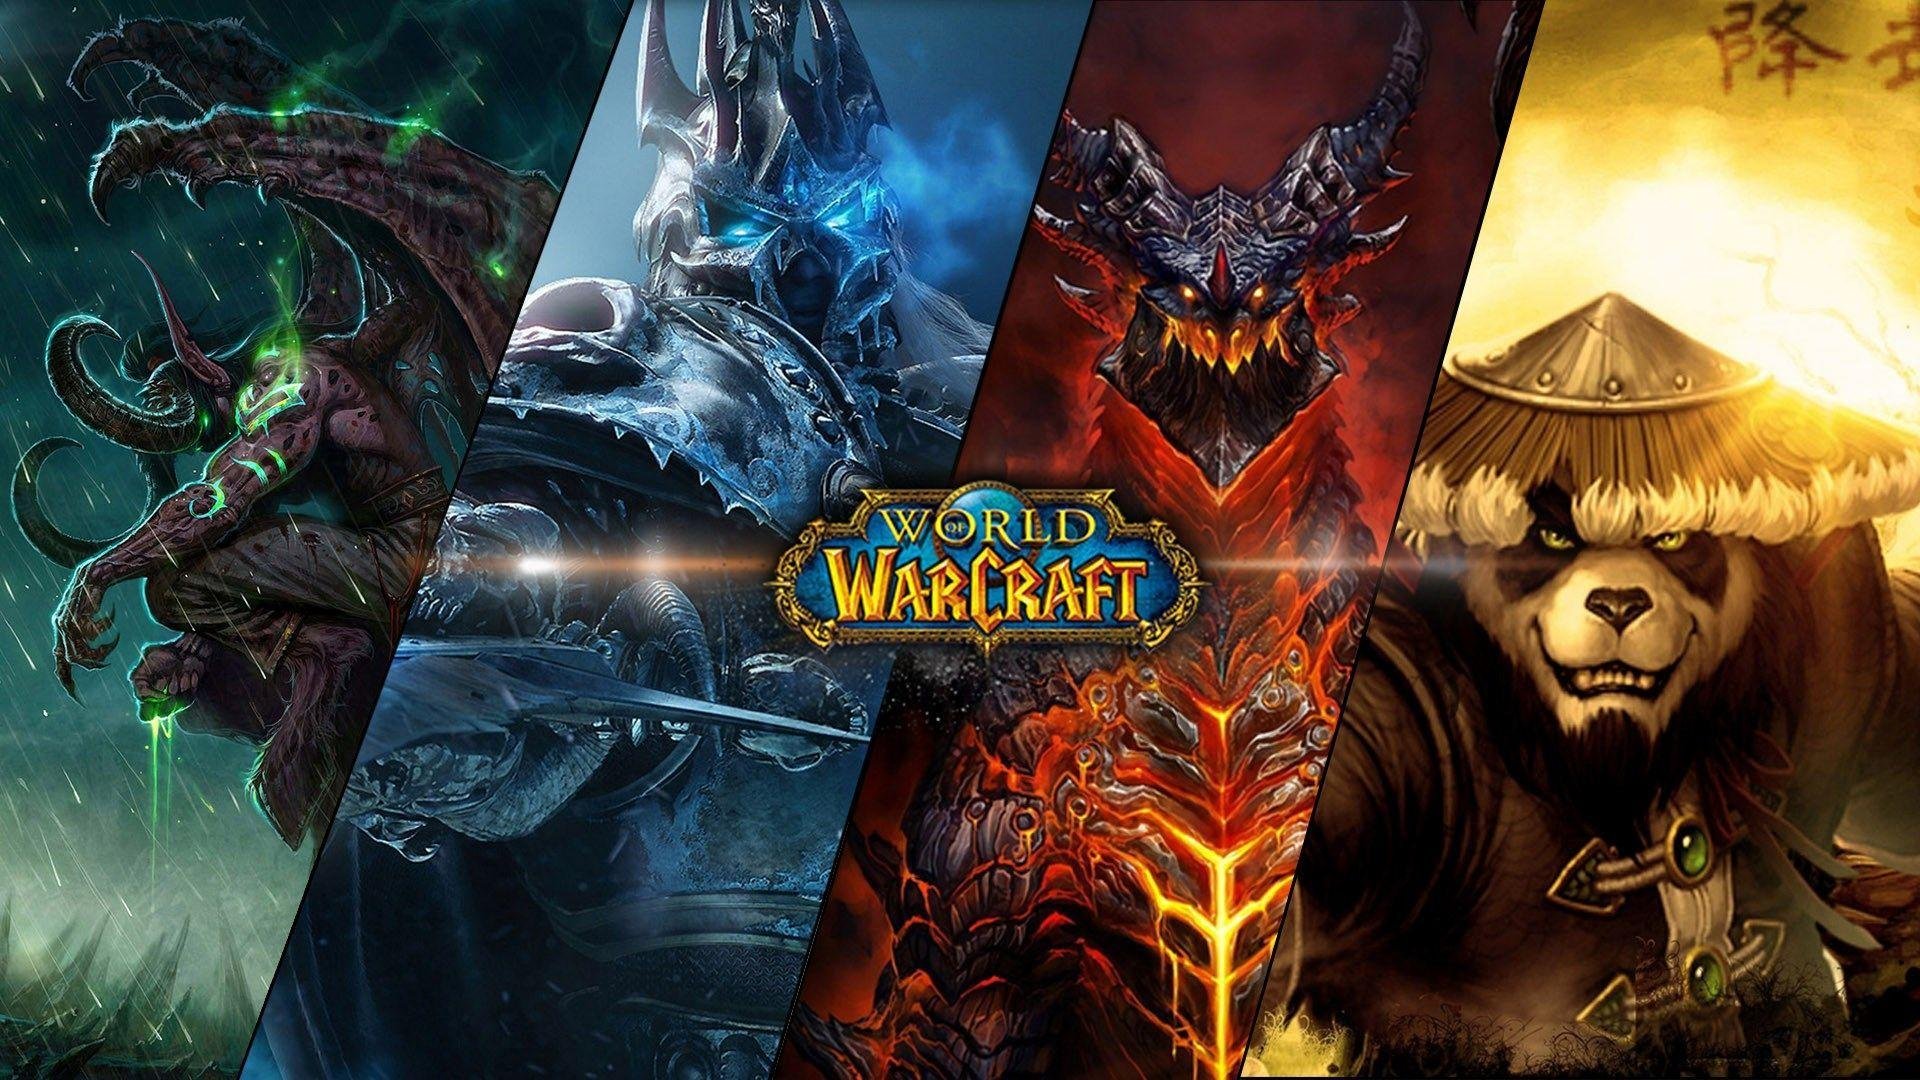 World of Warcraft on Xbox – Would it Work?